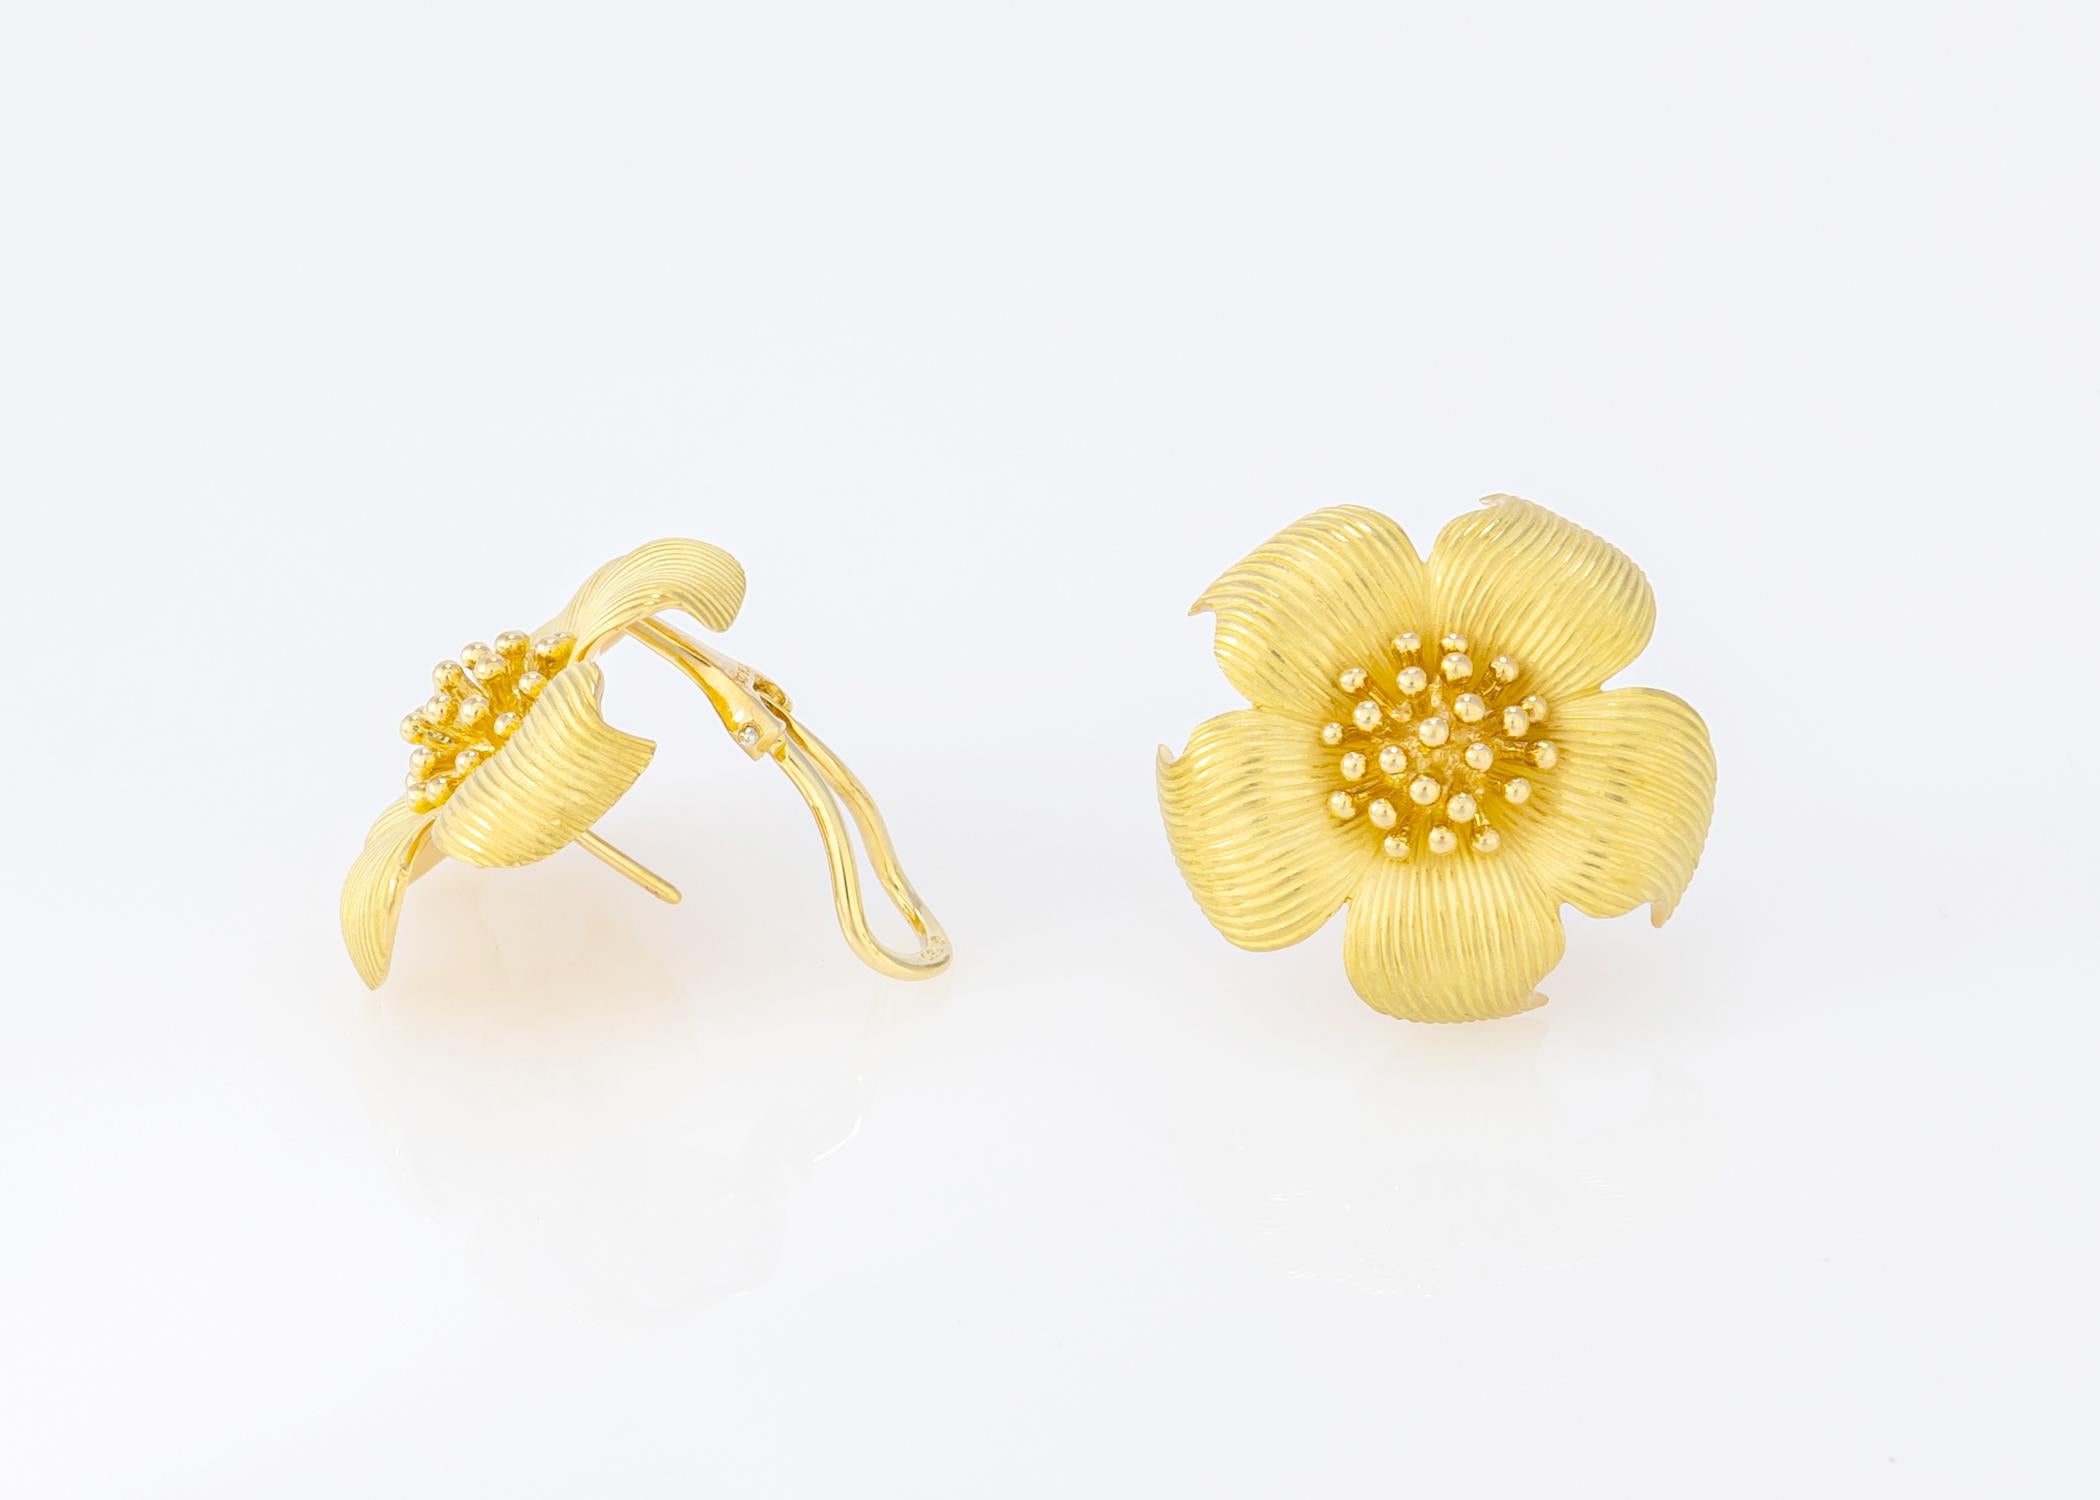 Tiffany & Co. has created wearable art since 1837. Mother Nature has been creating beauty since the beginning of time. Flowers have the power to slow us down and make us smile. This pair of five petal Tiffany earrings has amazing detailing and is